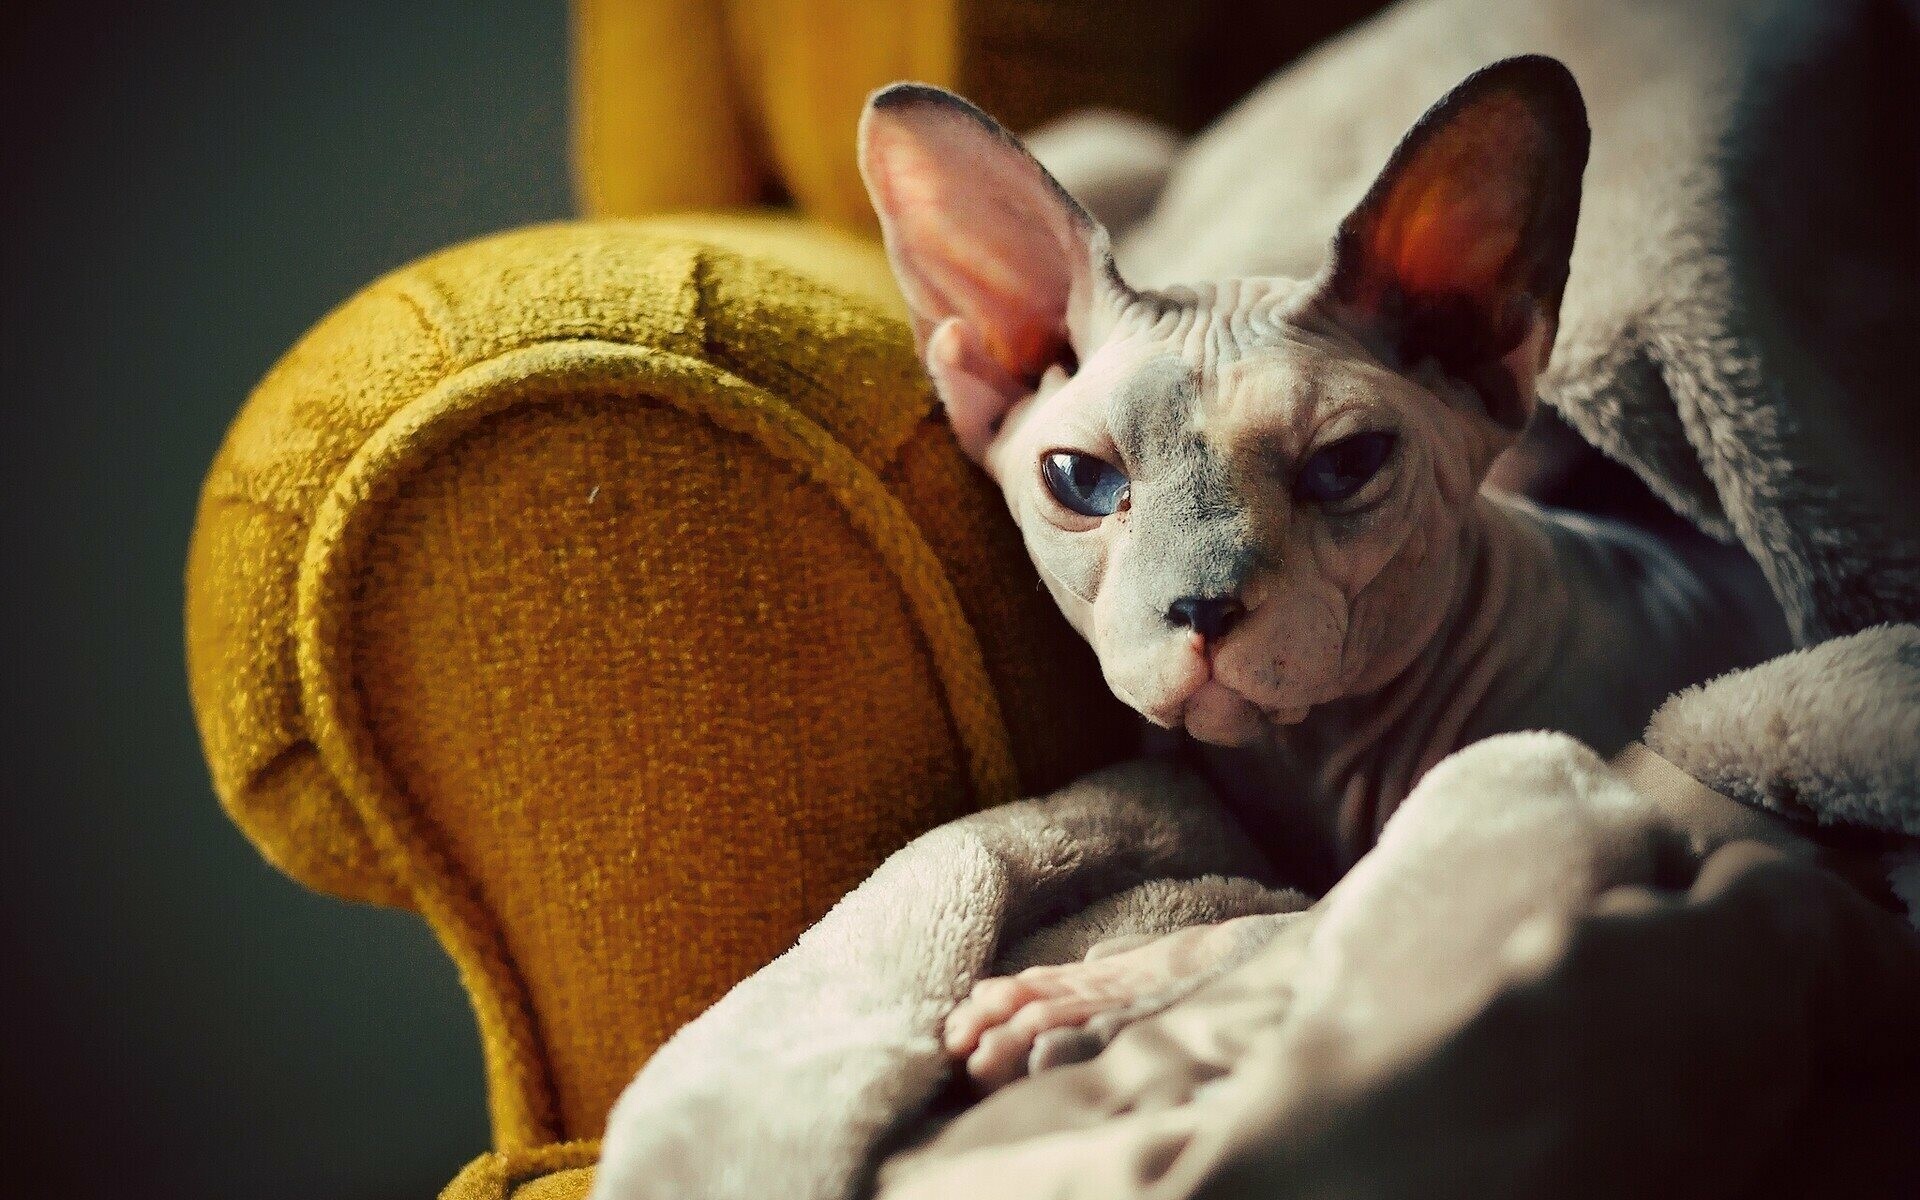 Sphynx: Nearly hairless, can range from completely bald to peach fuzz, Pet. 1920x1200 HD Wallpaper.